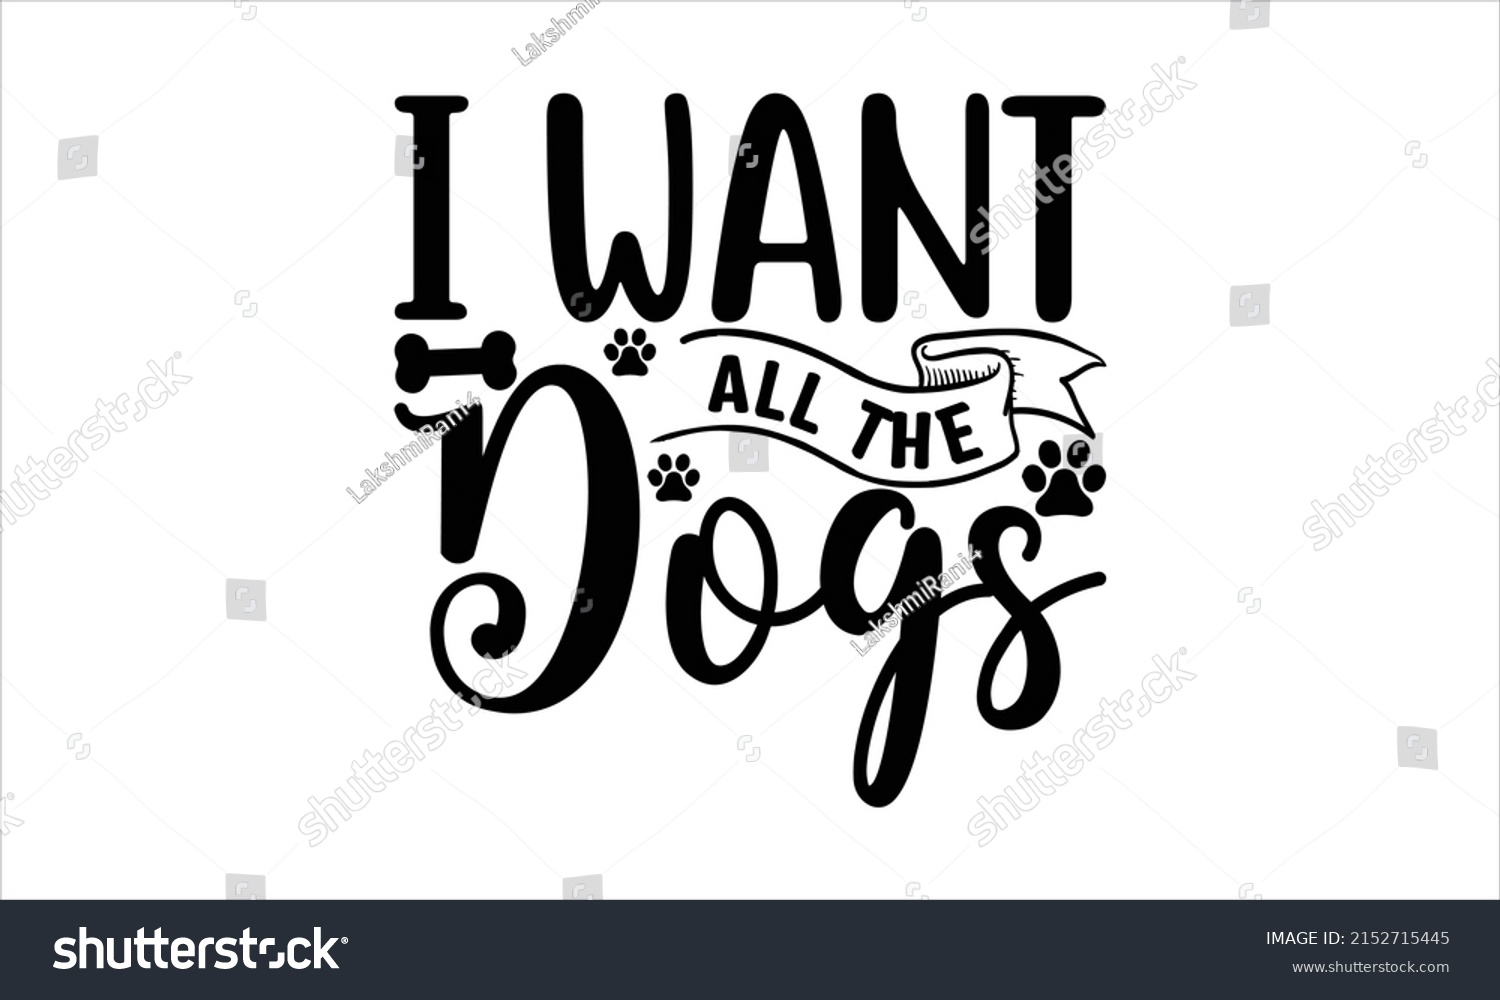 SVG of   I want all the dogs -   Lettering design for greeting banners, Mouse Pads, Prints, Cards and Posters, Mugs, Notebooks, Floor Pillows and T-shirt prints design svg